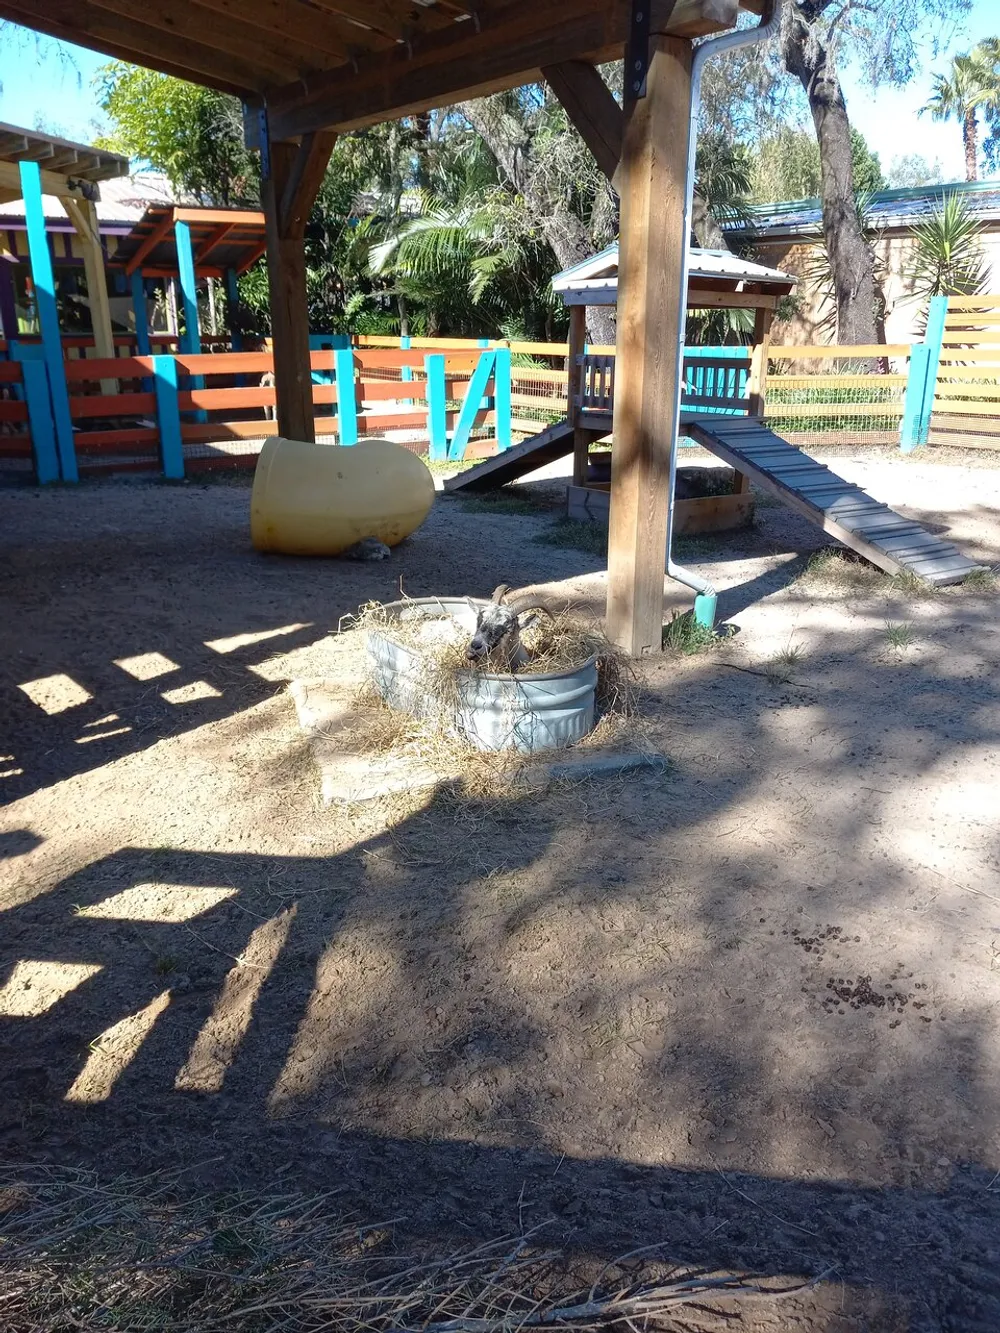 The image shows a sunny outdoor play area with a wooden structure a toppled plastic barrel and some hay on the ground creating a rustic atmosphere